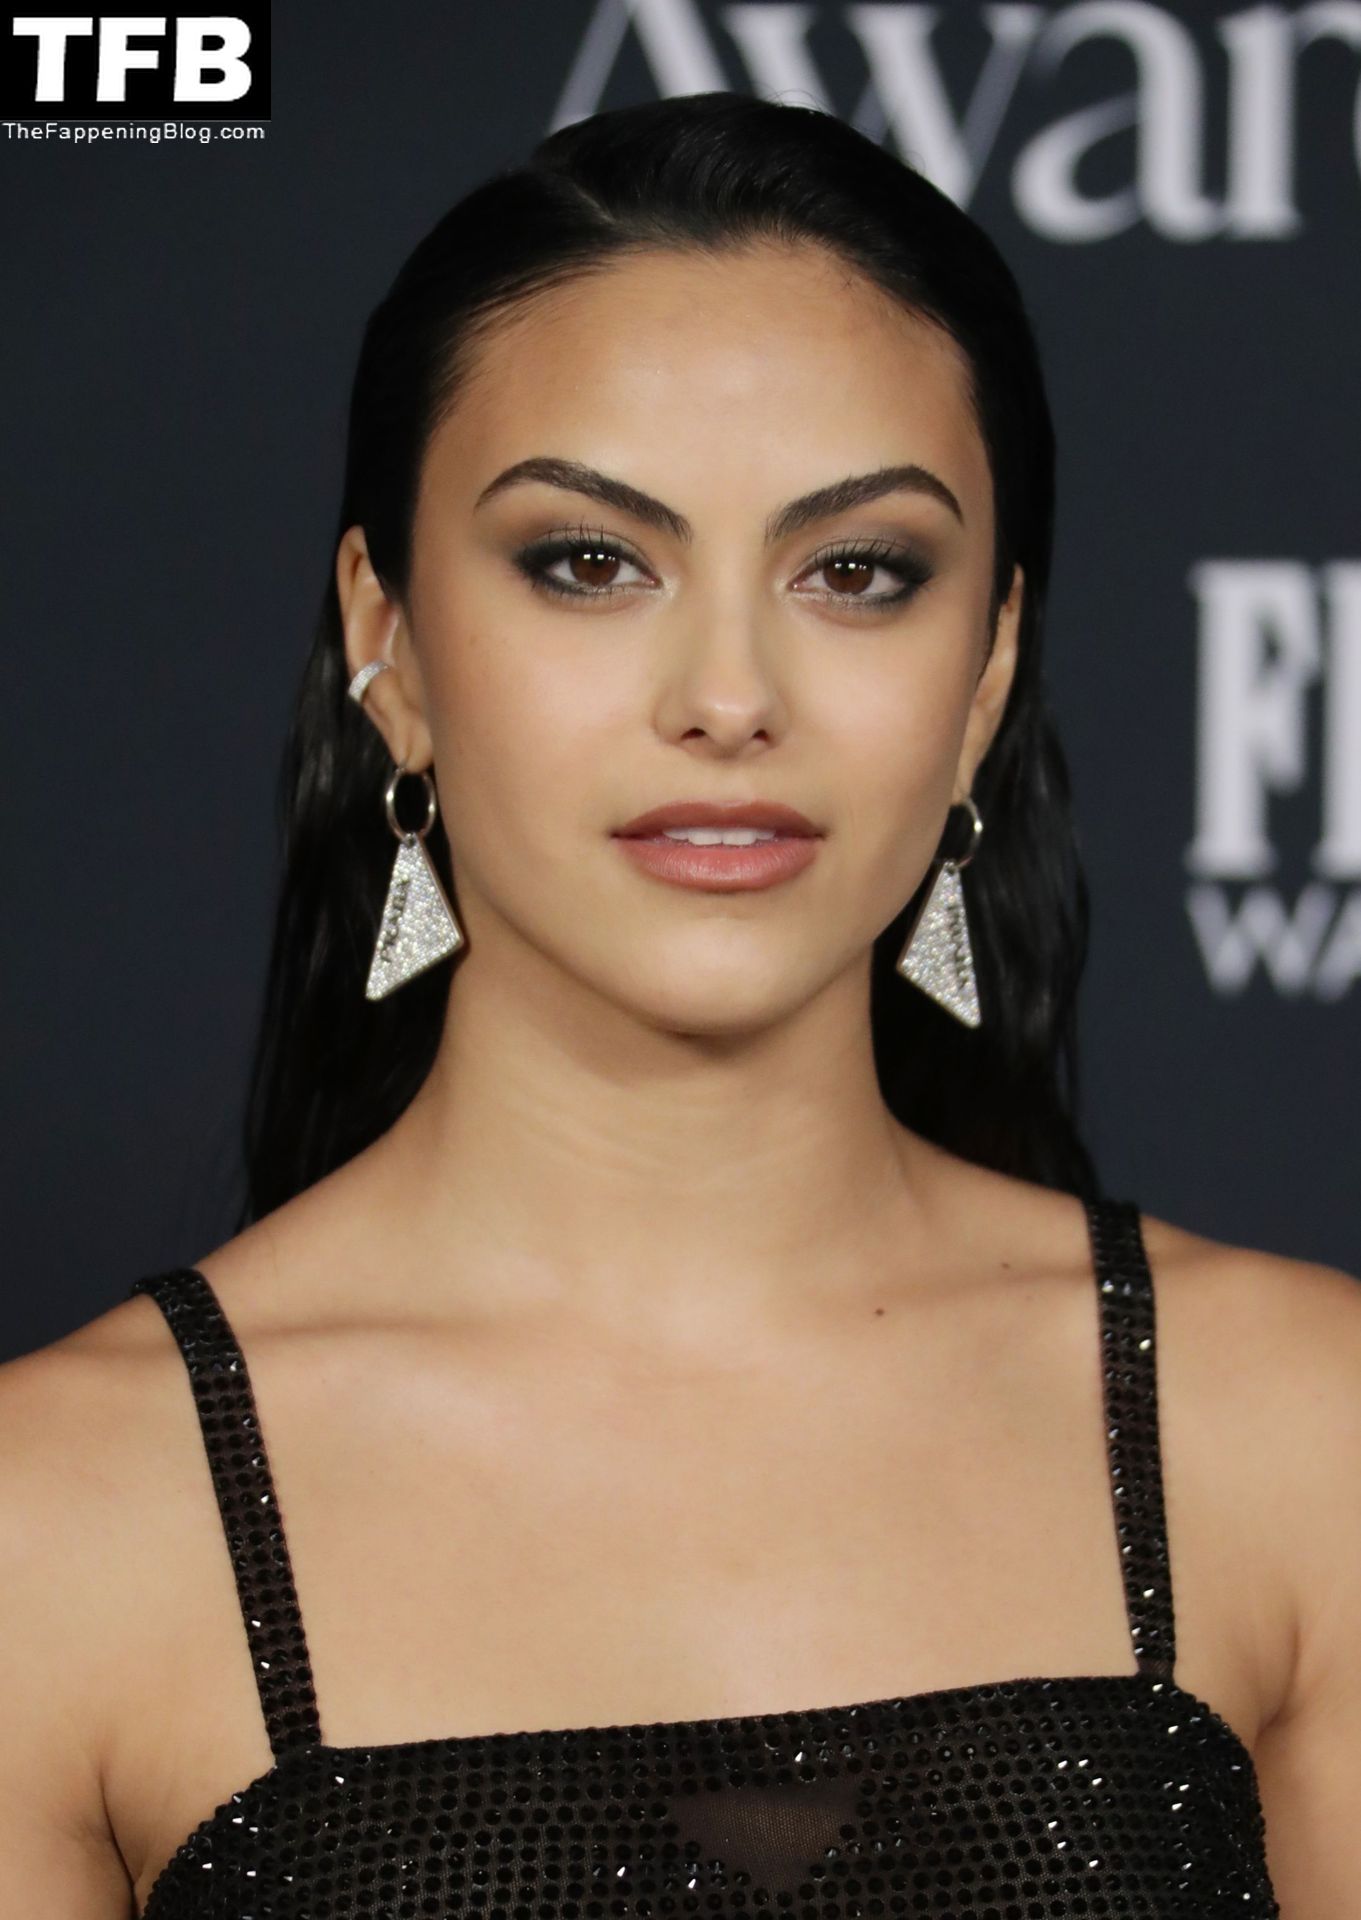 Camila-Mendes-See-Through-Tits-The-Fappening-Blog-92.jpg